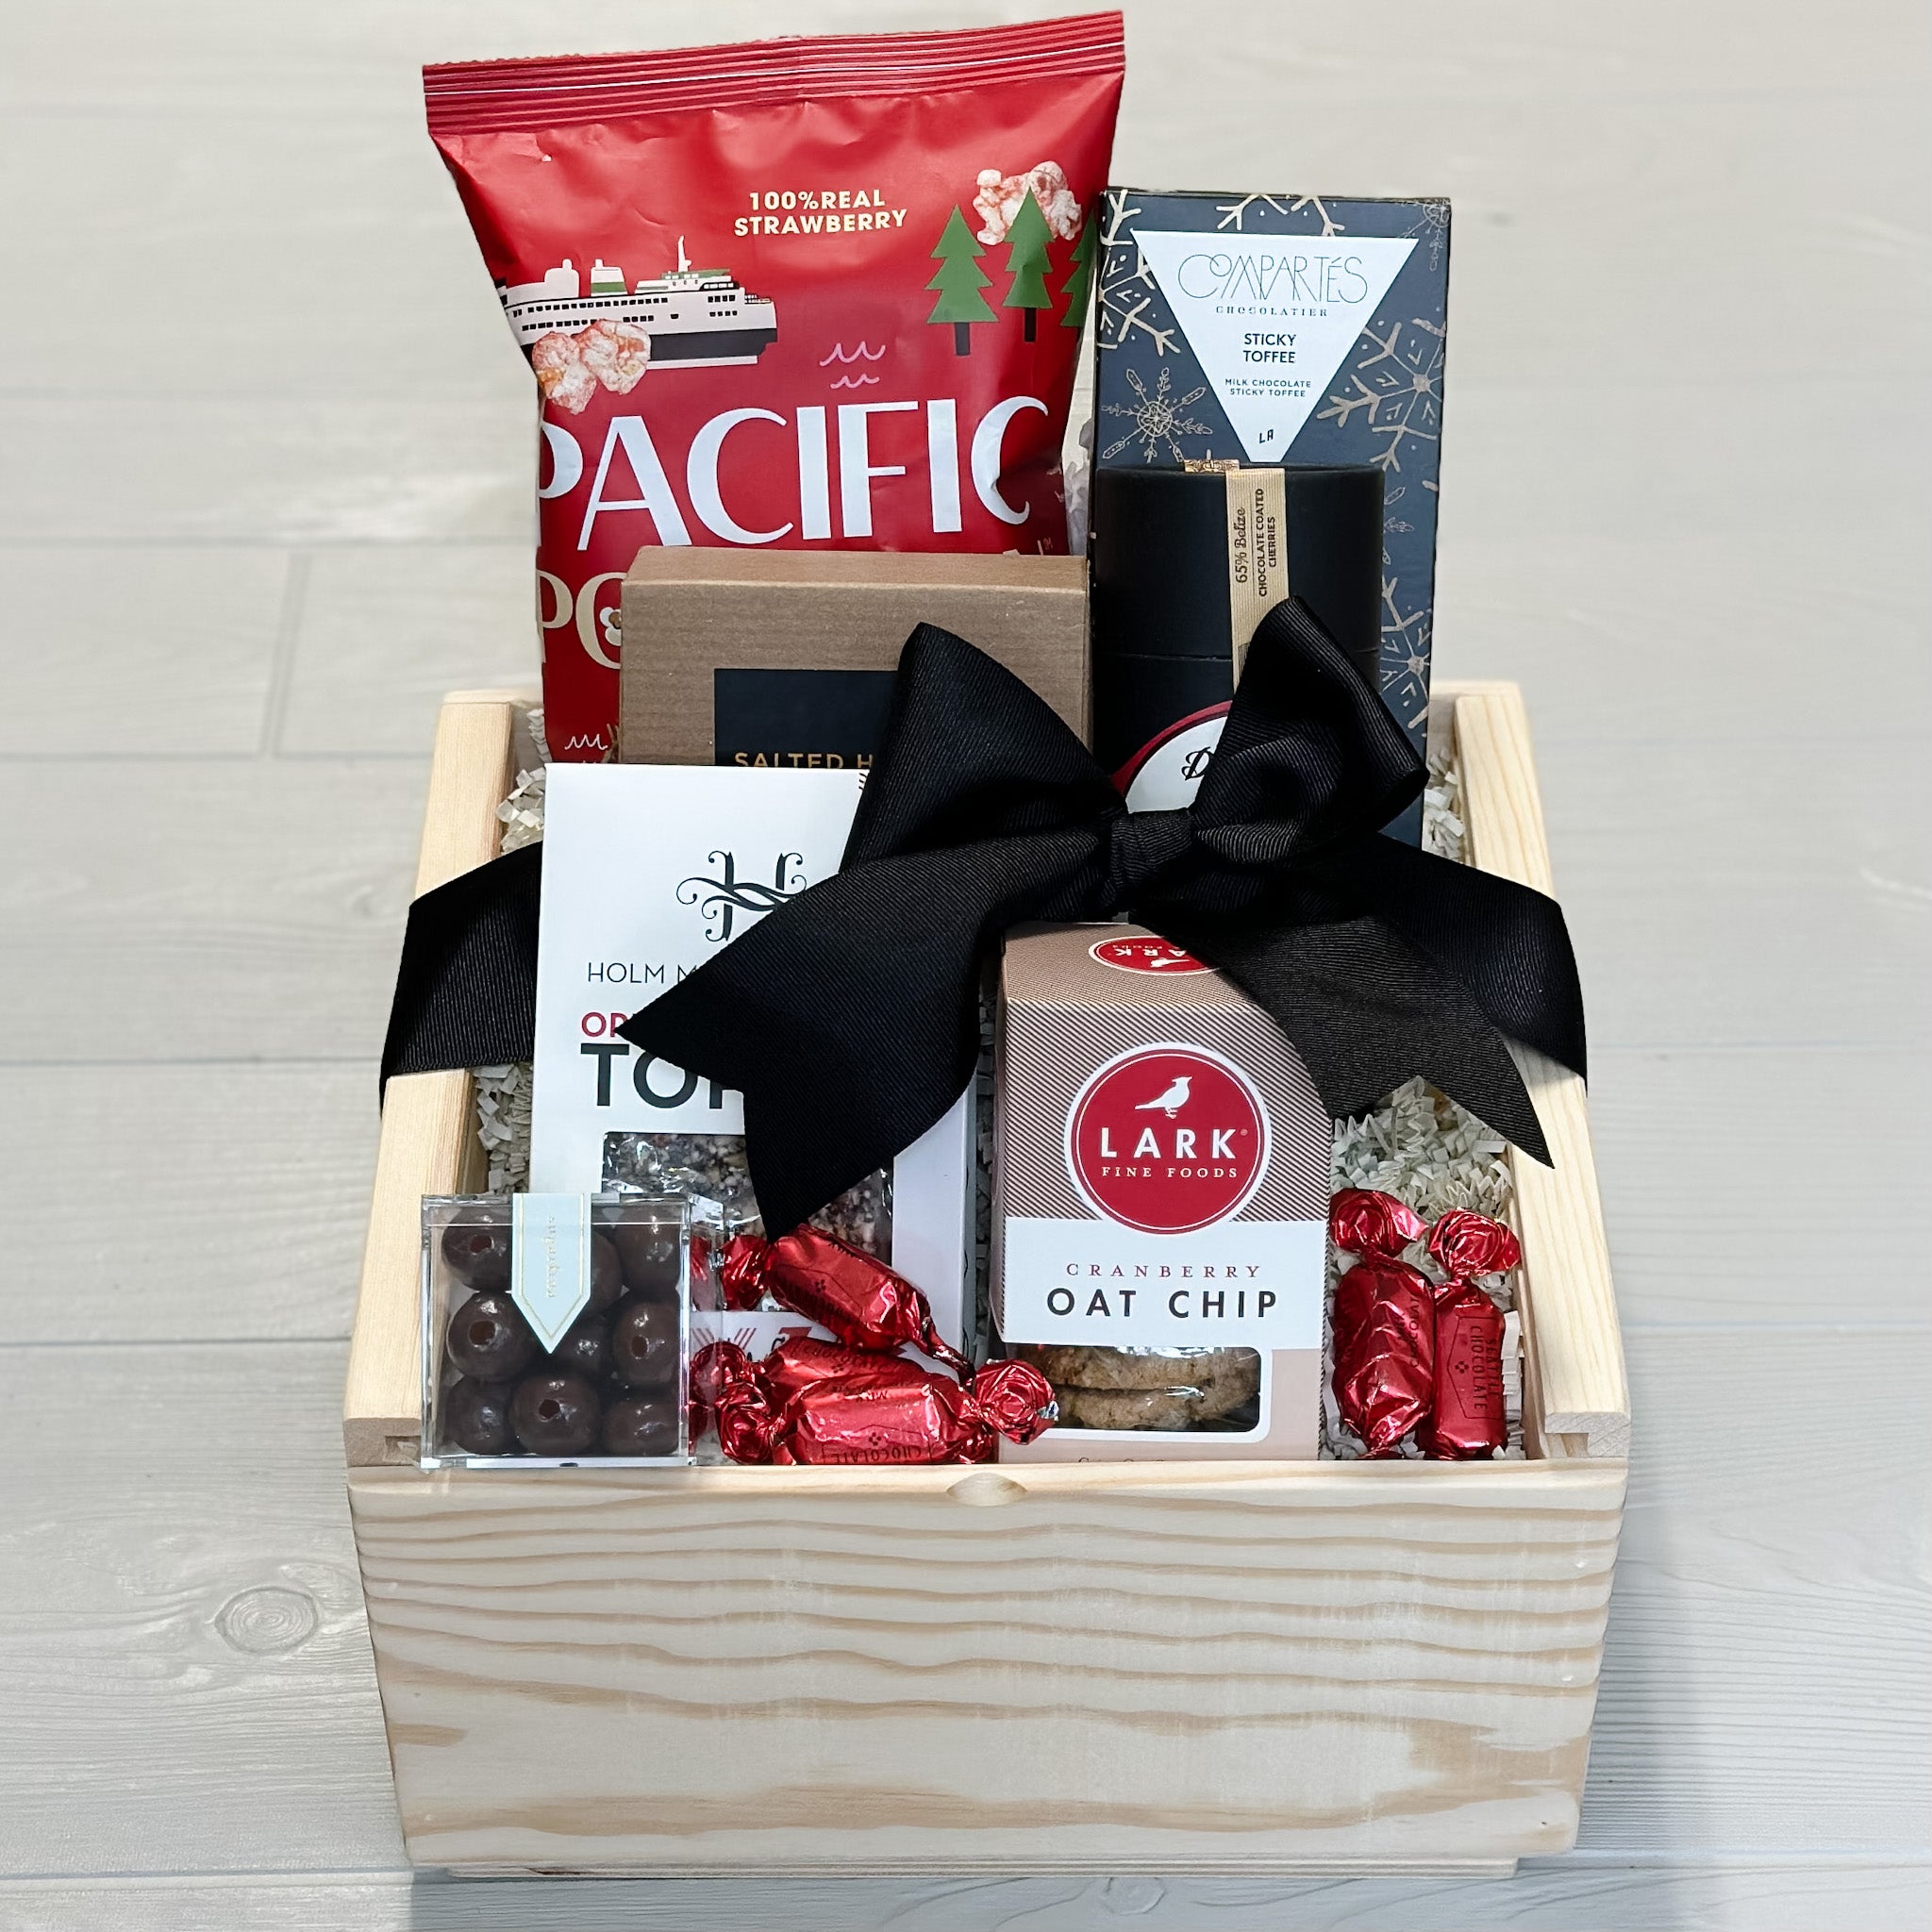 Our Yuletide Snack gift basket includes popcorn, toffee, caramel, cookies, chocolate covered cherries, pretzel balls